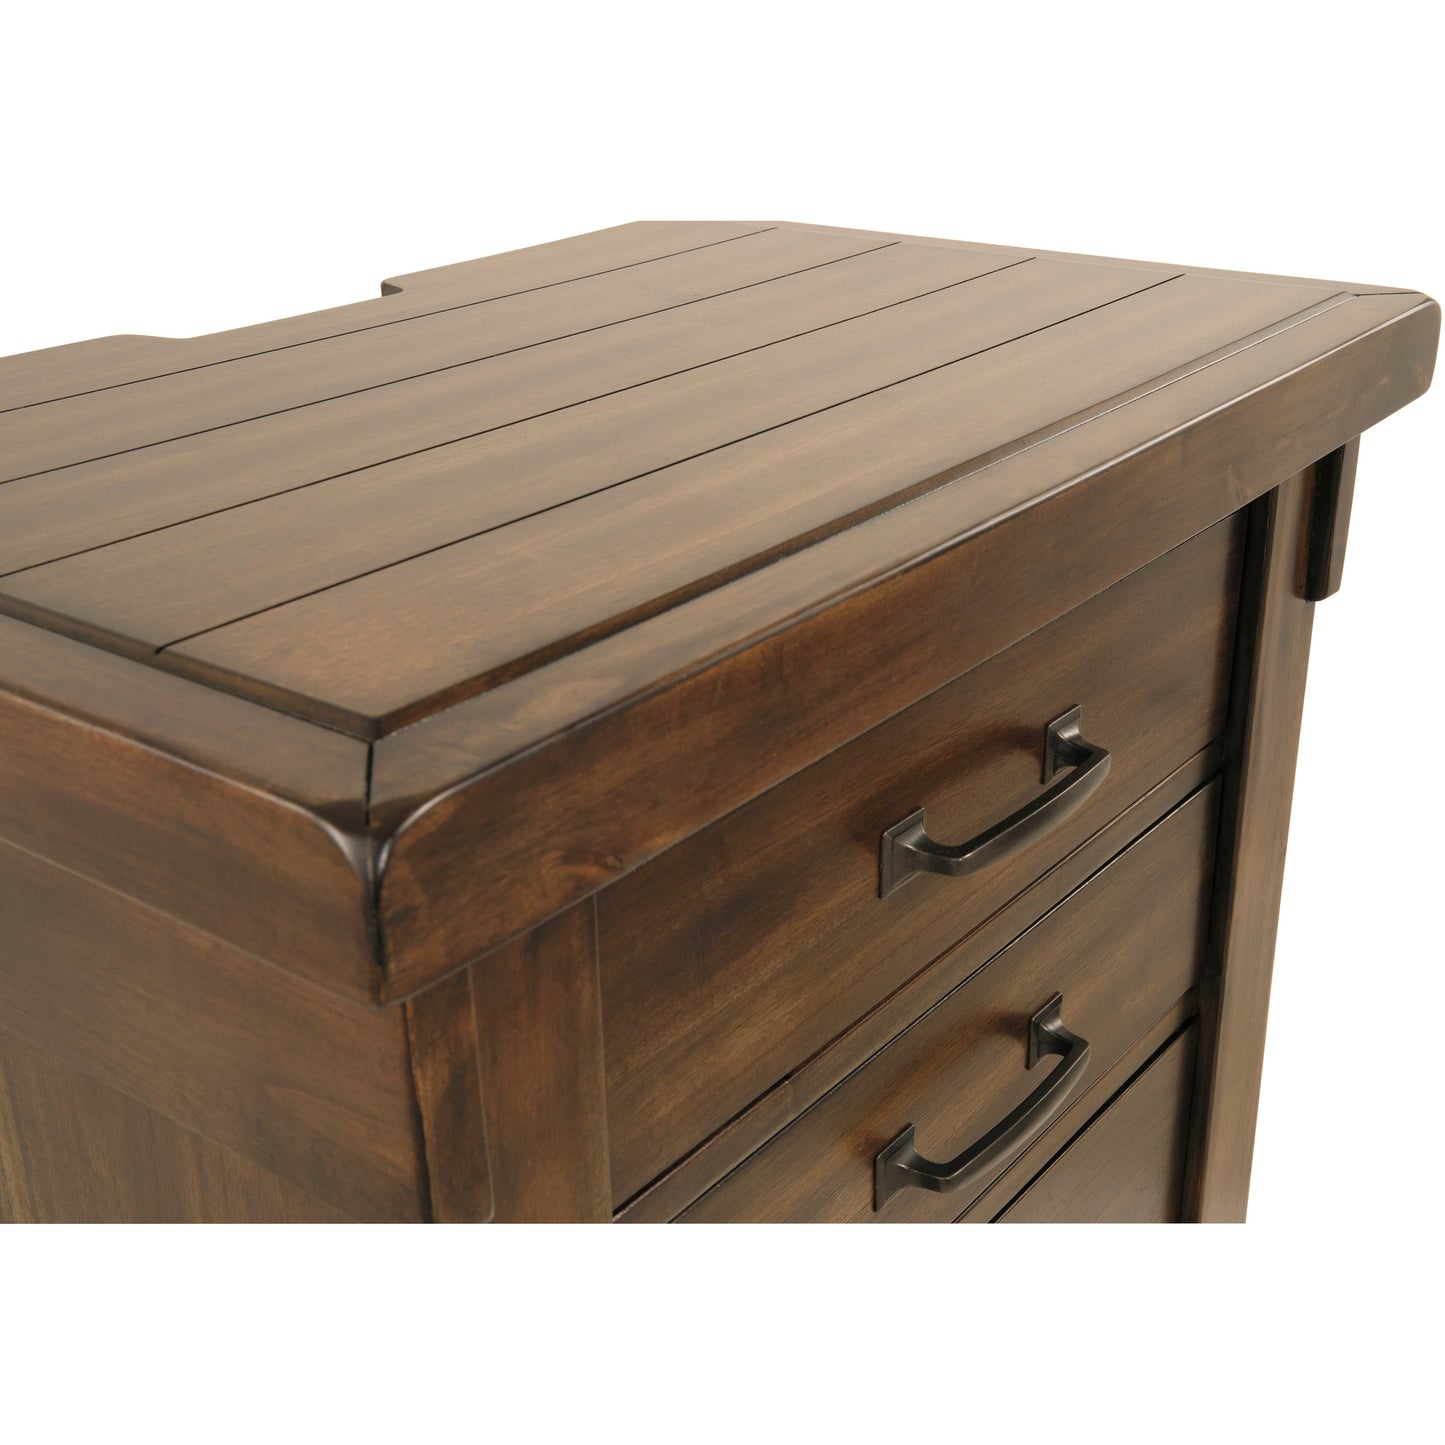 LAKELEIGH NIGHT STAND - BROWN